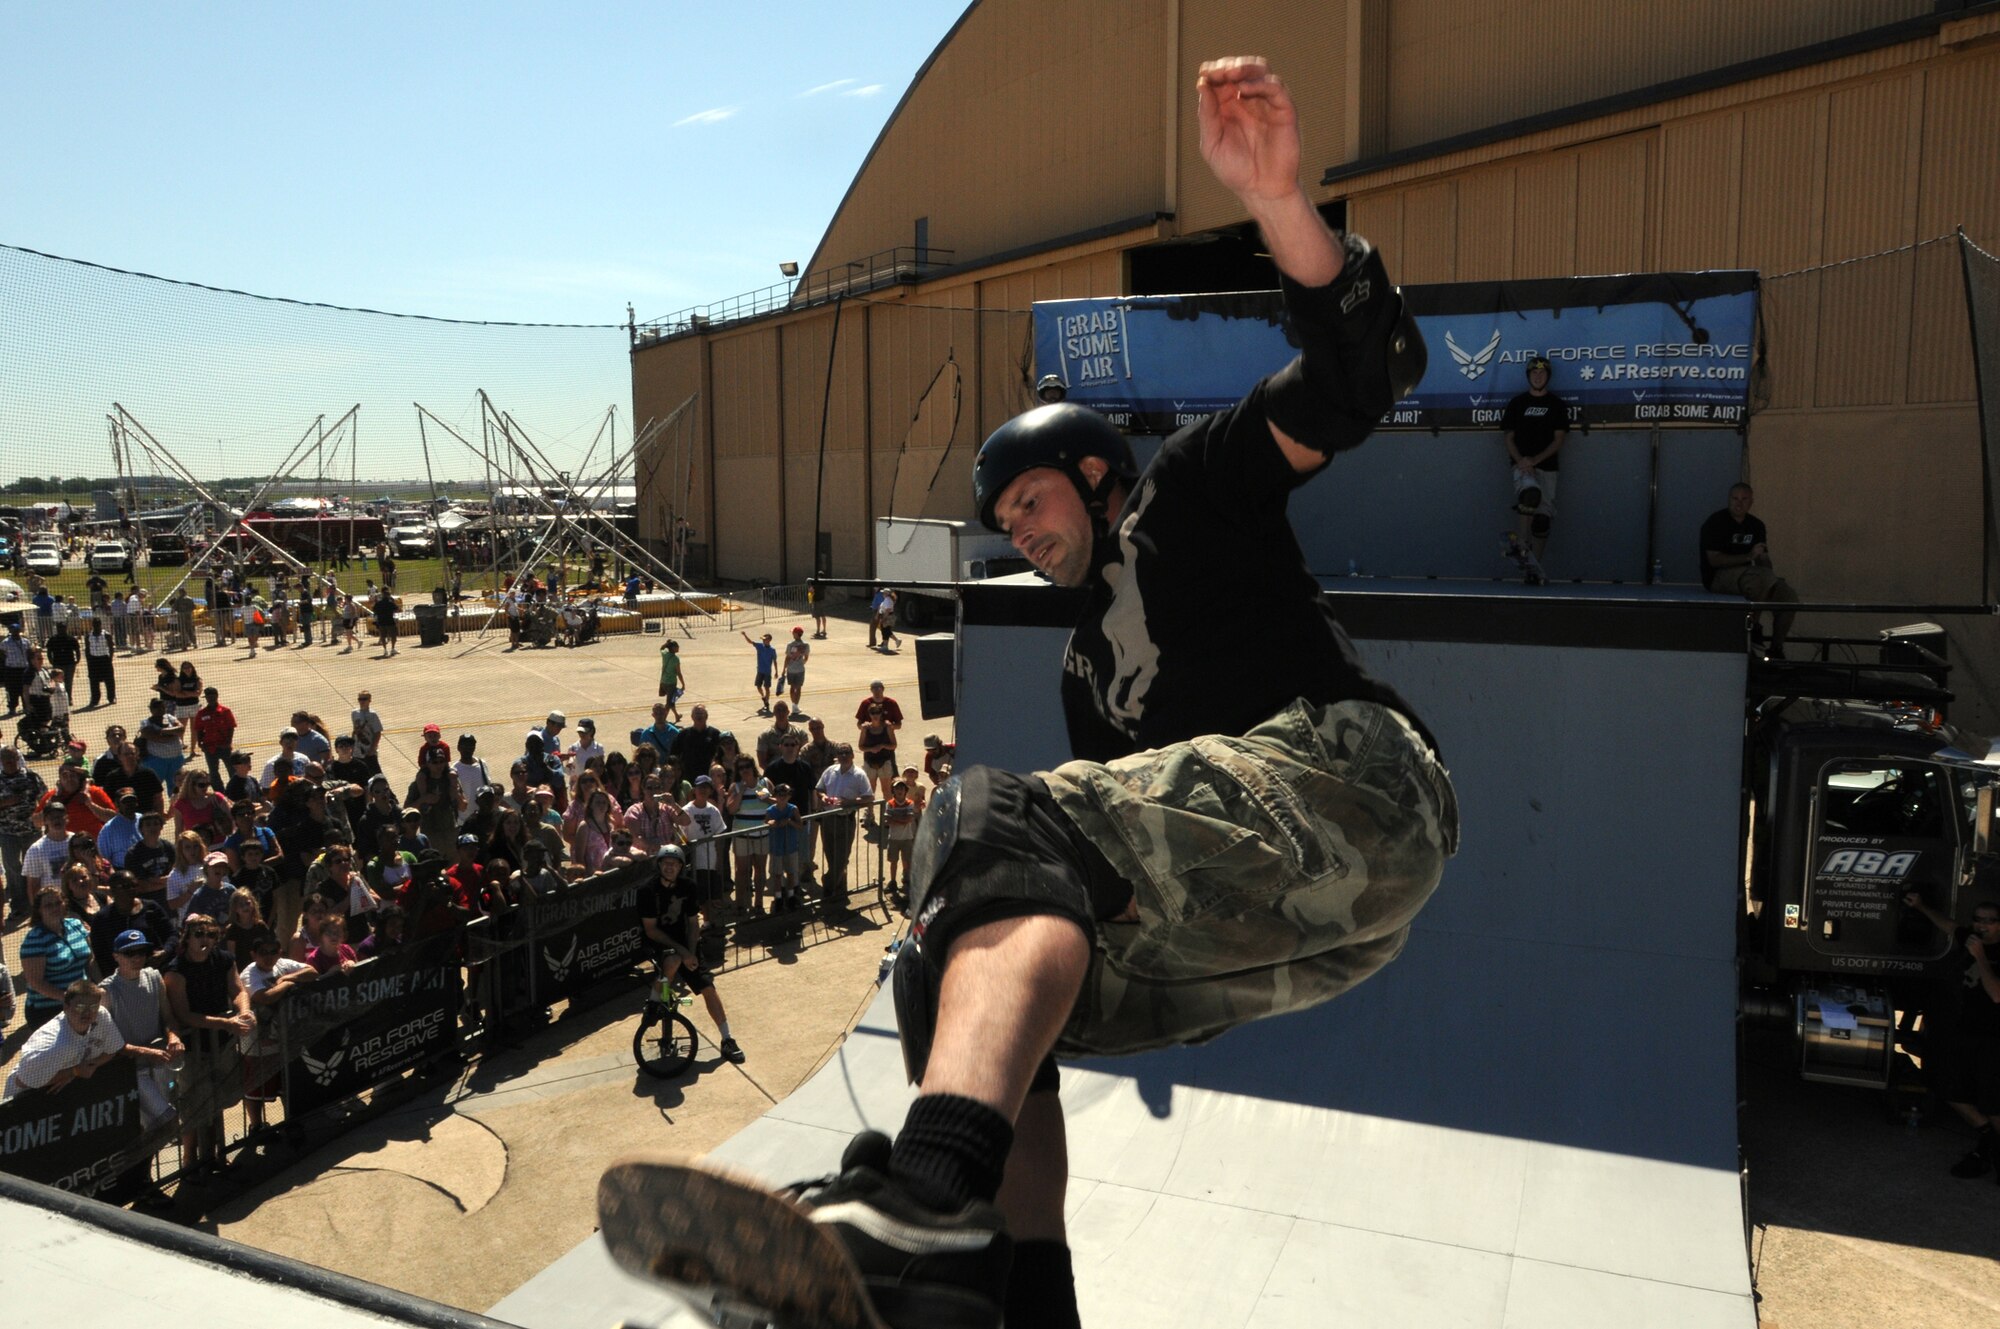 JOINT BASE ANDREWS, Md.-- Jay Stevason, a team skateboarder for ASA Entertainment, hits the ramp at the Joint Service Open House here May 15. Mr. Stevason joins other extreme athletes in supporting the Air Force Reserve recruiting campaign, "Grab Some Air," which aims at attracting an active demographic of 17-34 years old to the Reserve. The JSOH allows members of the public an excellent opportunity to meet and interact with the men and women of the Armed Forces and to show them America’s skilled military. (U.S. Air Force photo by Staff Sgt. Steve Lewis)